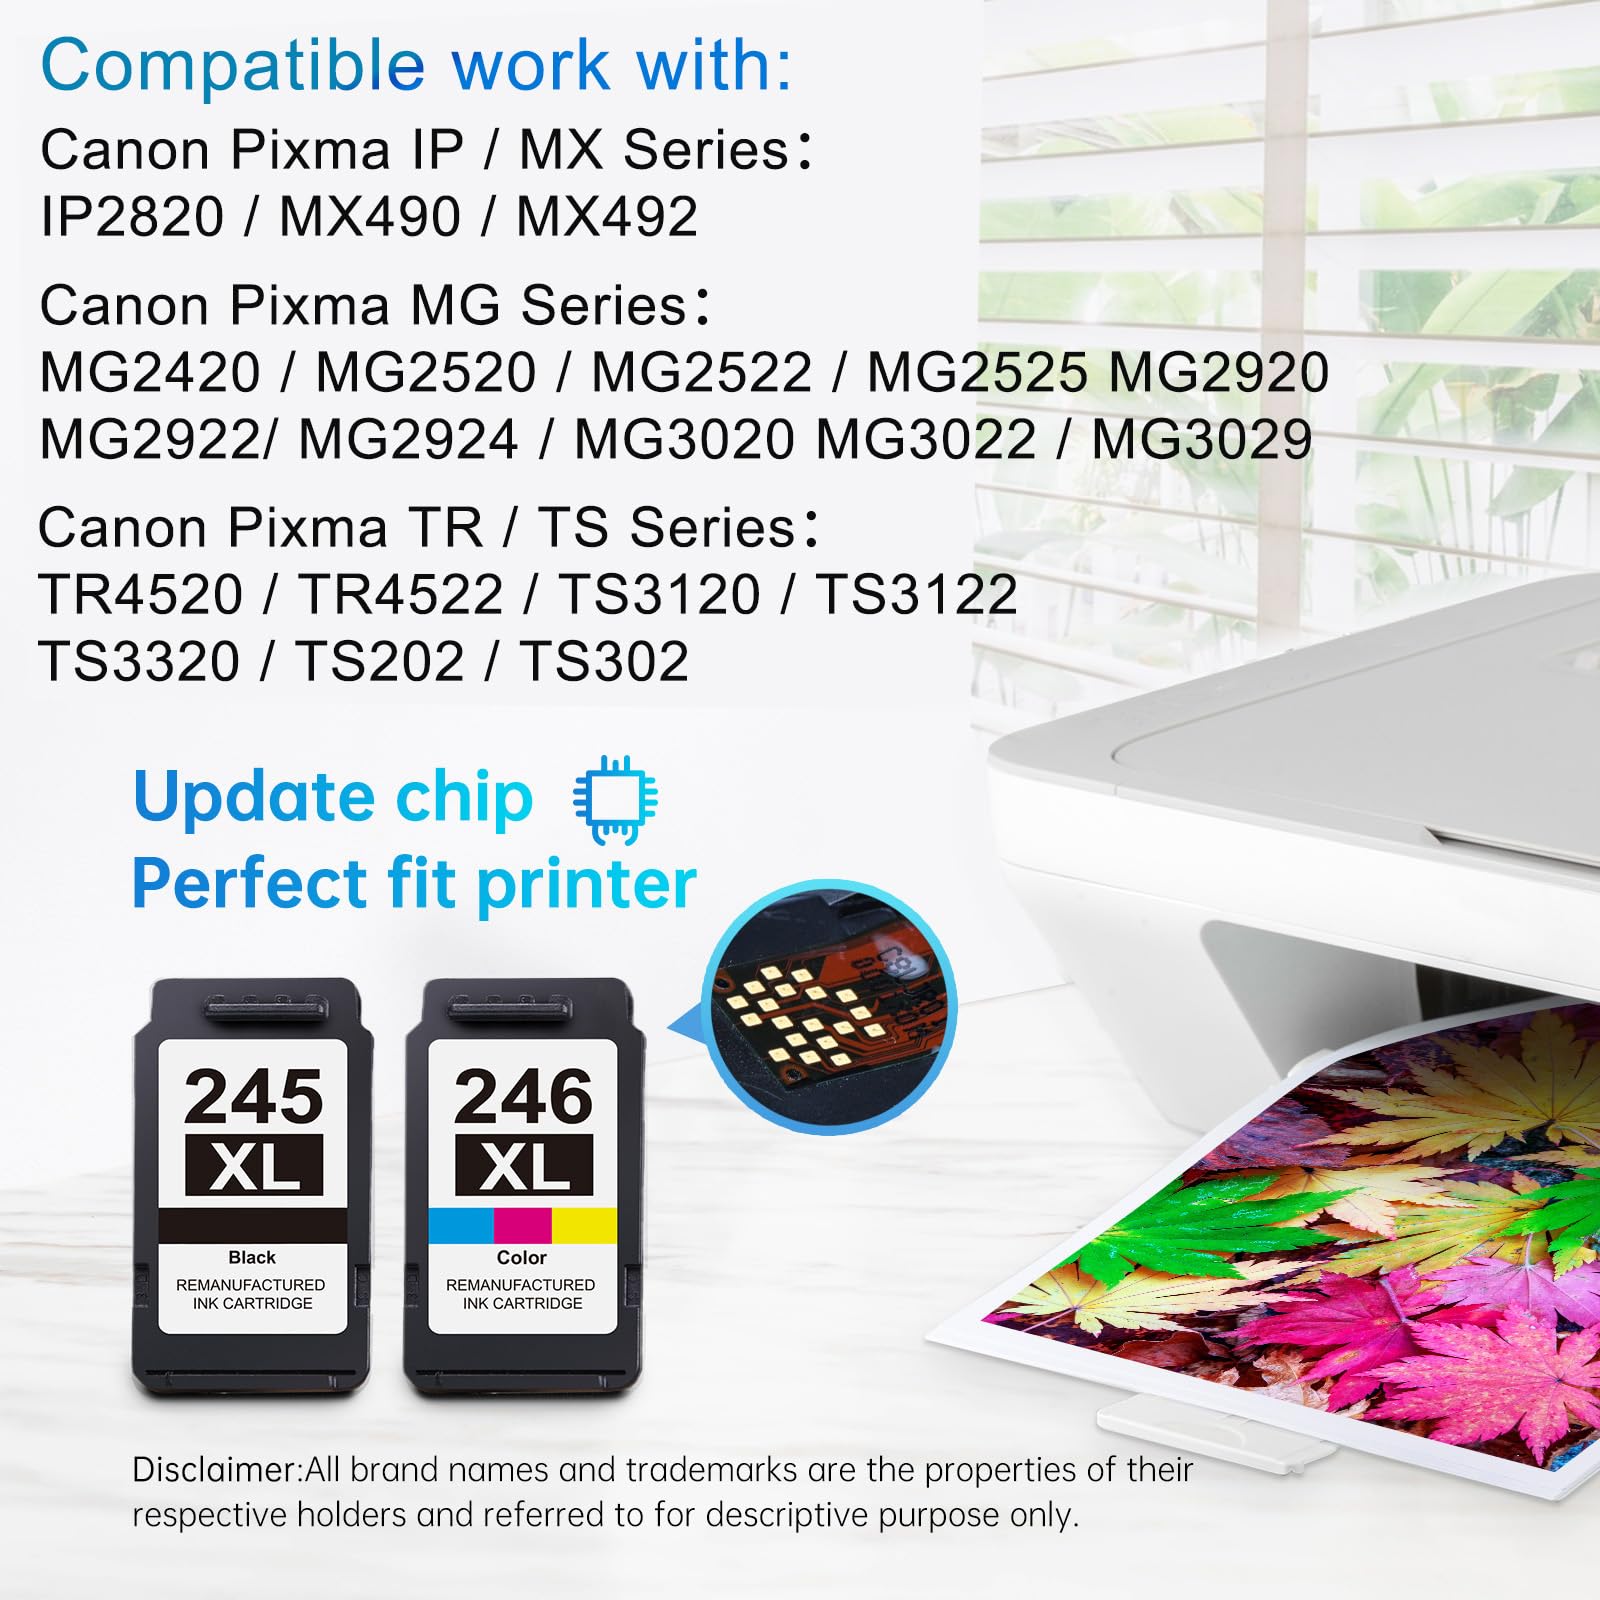 Compatible with Various Canon Pixma Models: Detailed compatibility list for LEMERO 245XL and 246XL ink cartridges with Canon Pixma series printers, highlighting the updated chip technology for perfect fit and function.